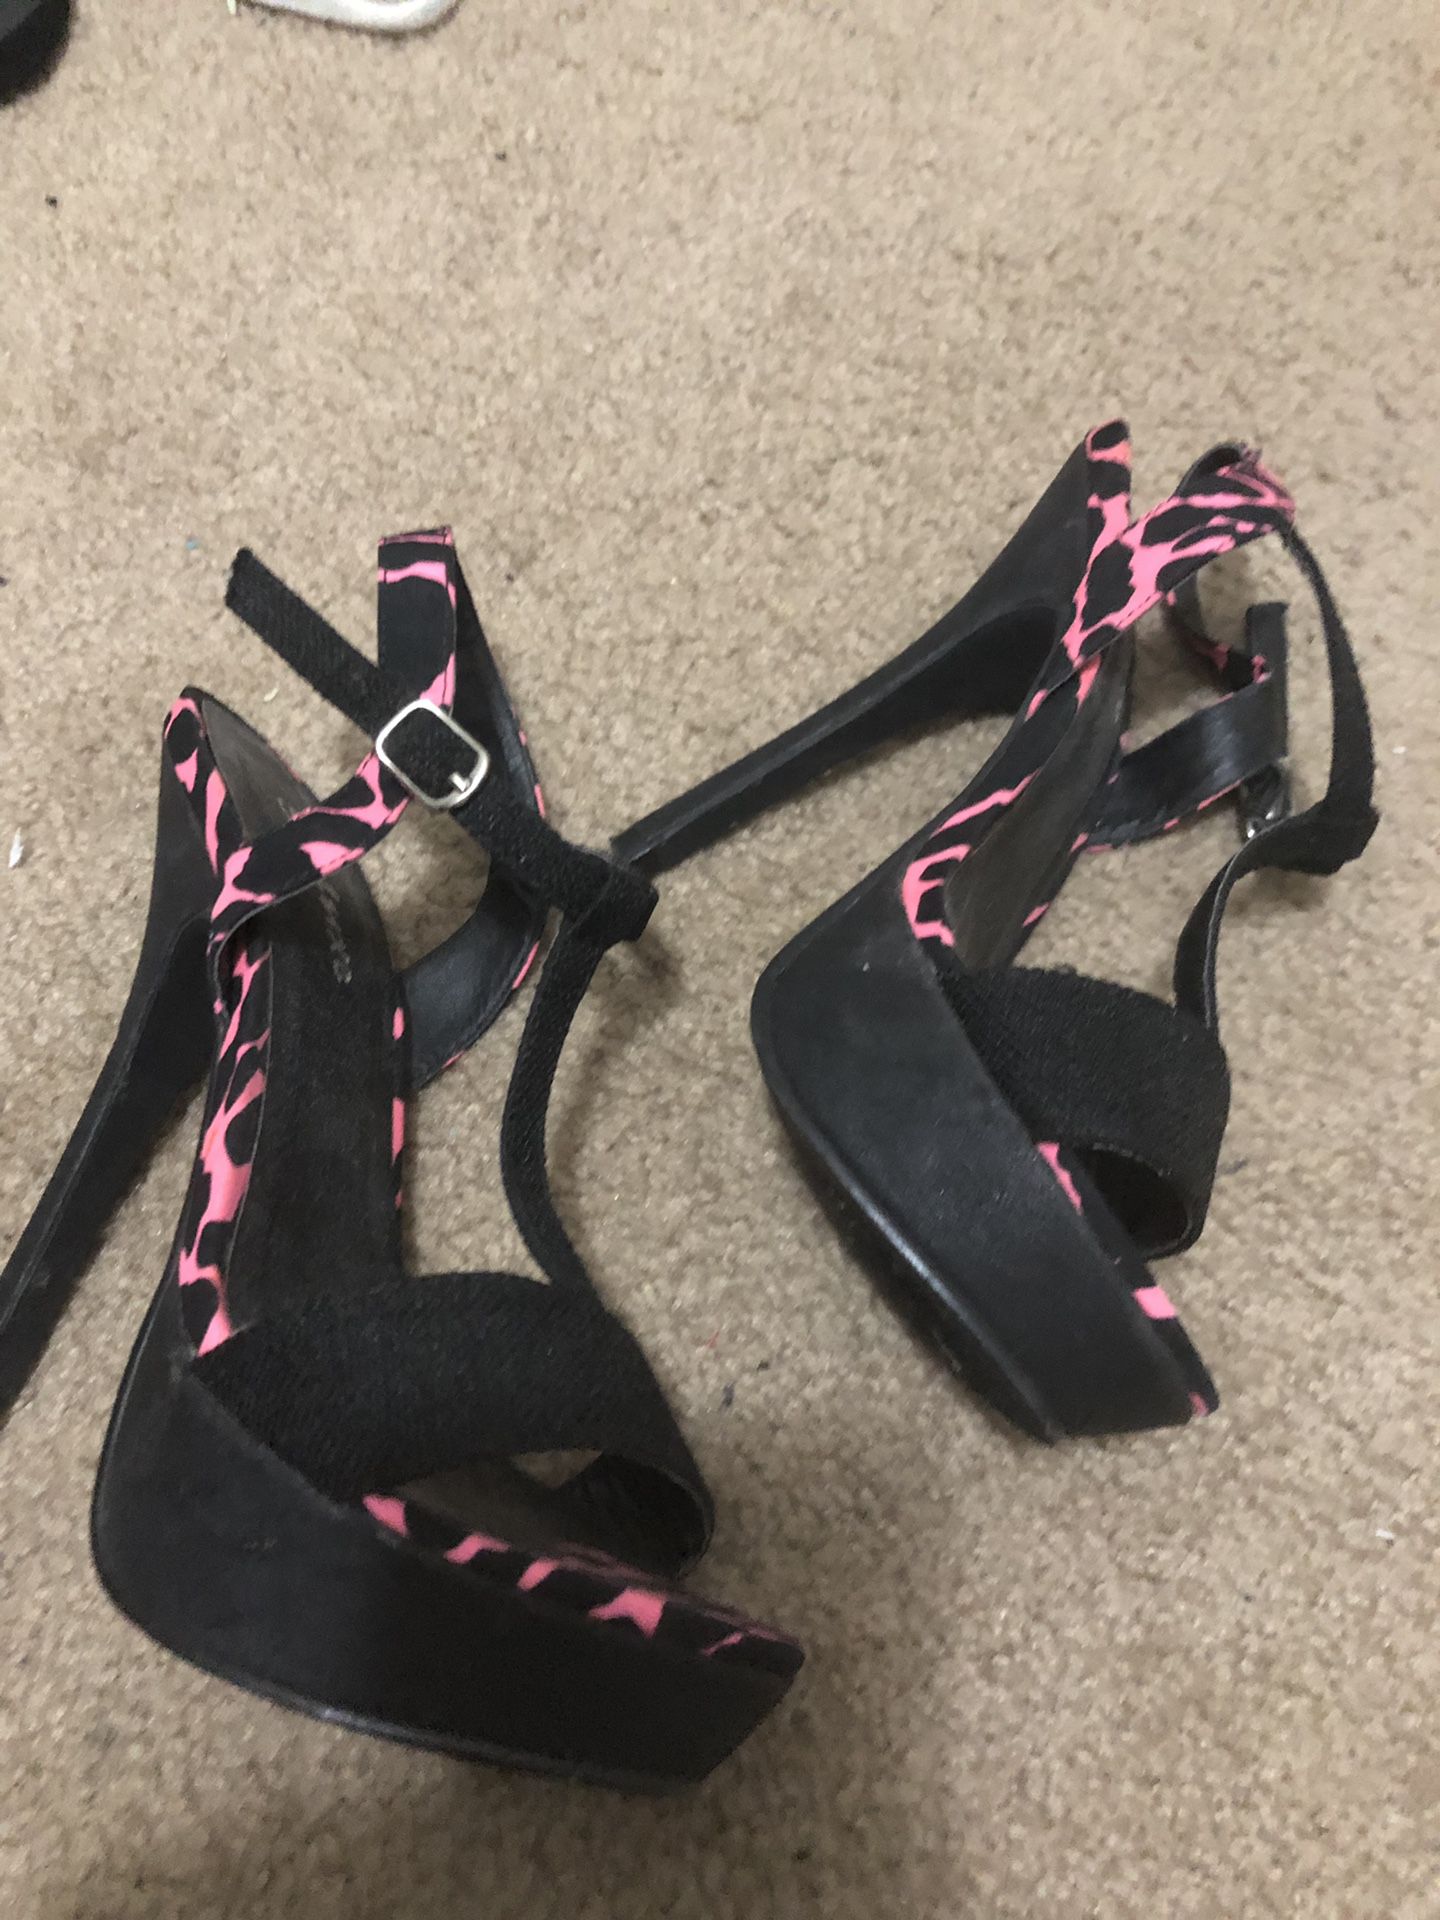 Black and hot pink heals size 6